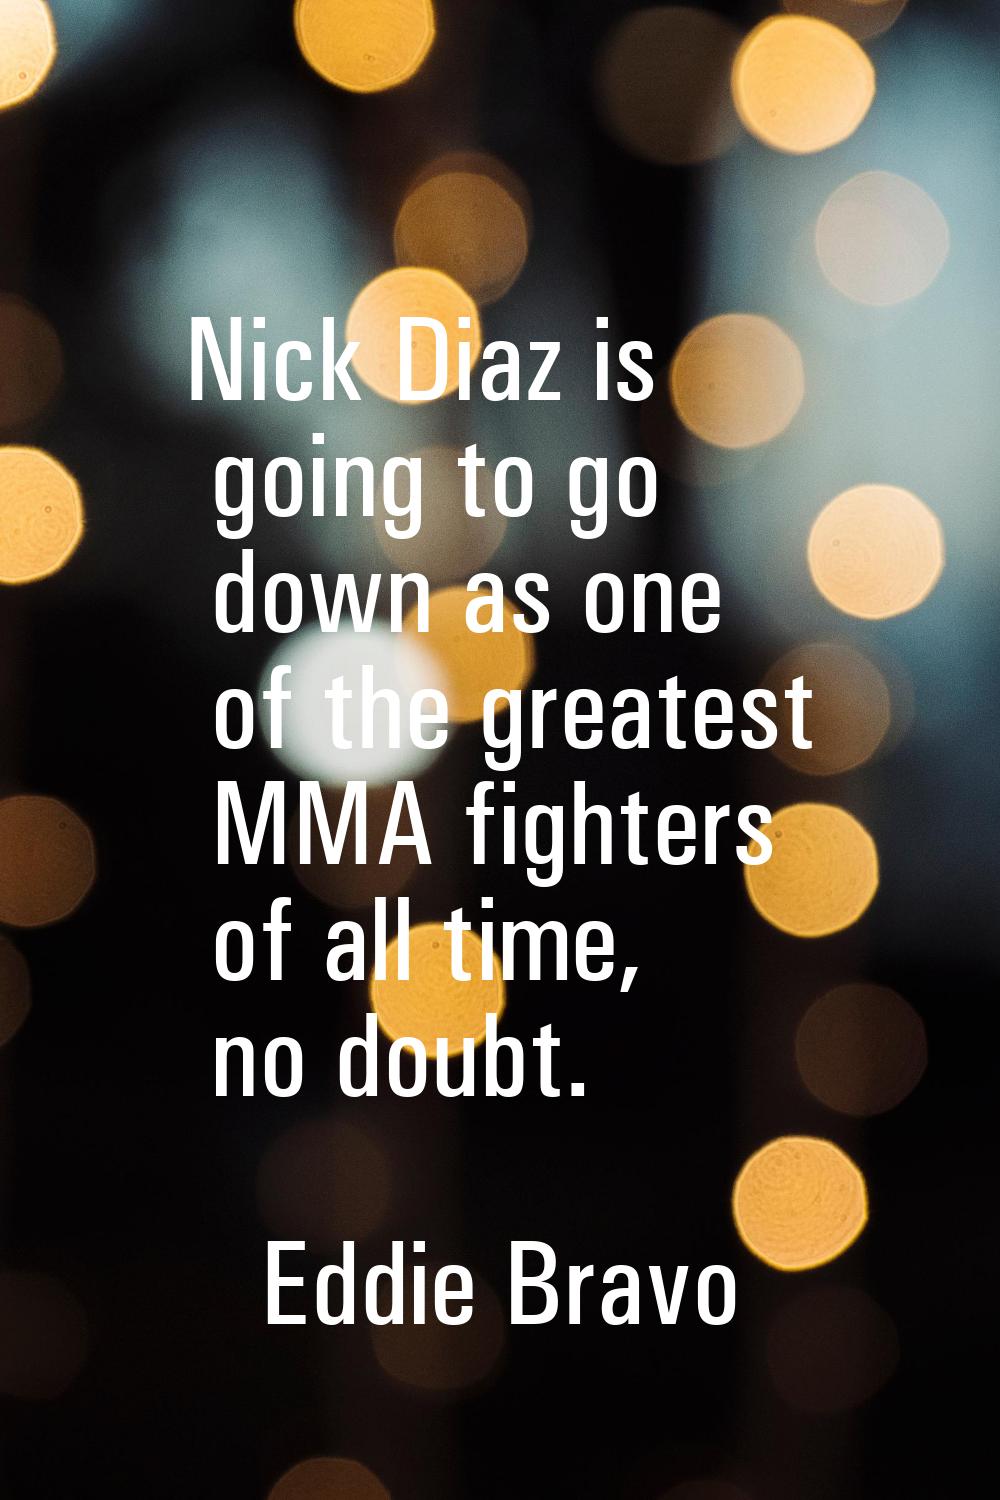 Nick Diaz is going to go down as one of the greatest MMA fighters of all time, no doubt.